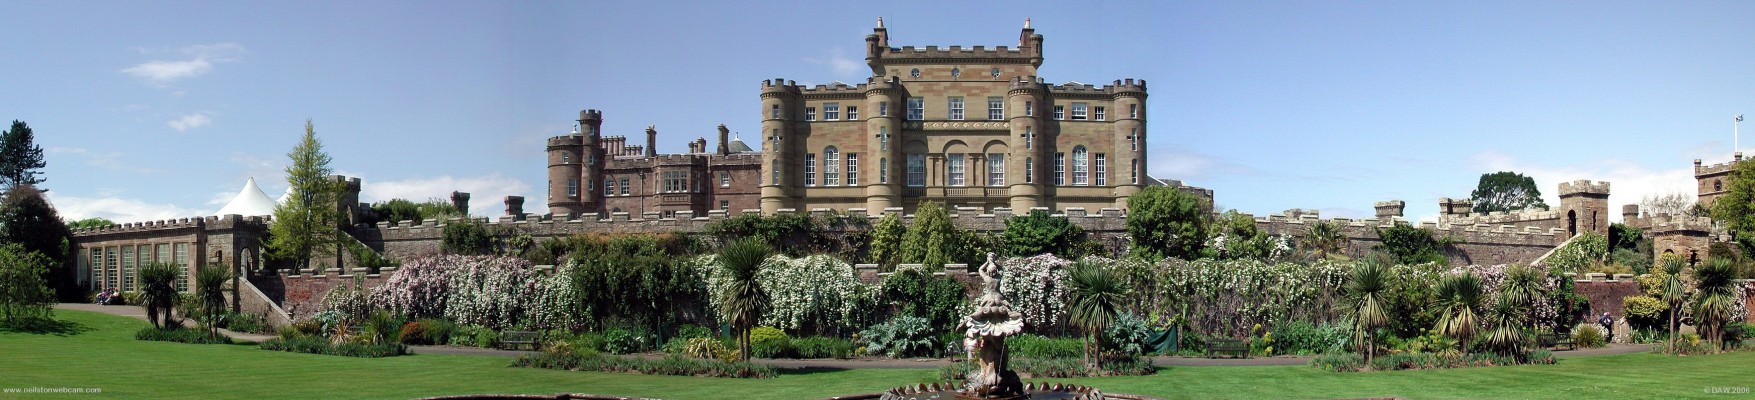 Culzean Castle, Ayrshire
[url=http://www.culzeanexperience.org/]Culzean[/url] is one of Ayrshire's favourite tourist attractions.  The original Castle was remodelled between 1772 and 1790 by Robert Adam for the 10th Earl of Cassillis. Robert Adam carried out a massive schedule of enlargement and decoration in his Neo-classical style. This included the enormous circular Saloon and Oval Staircase as well as ceilings, plasterwork mouldings and paintings by Antonio Zucchi. 
